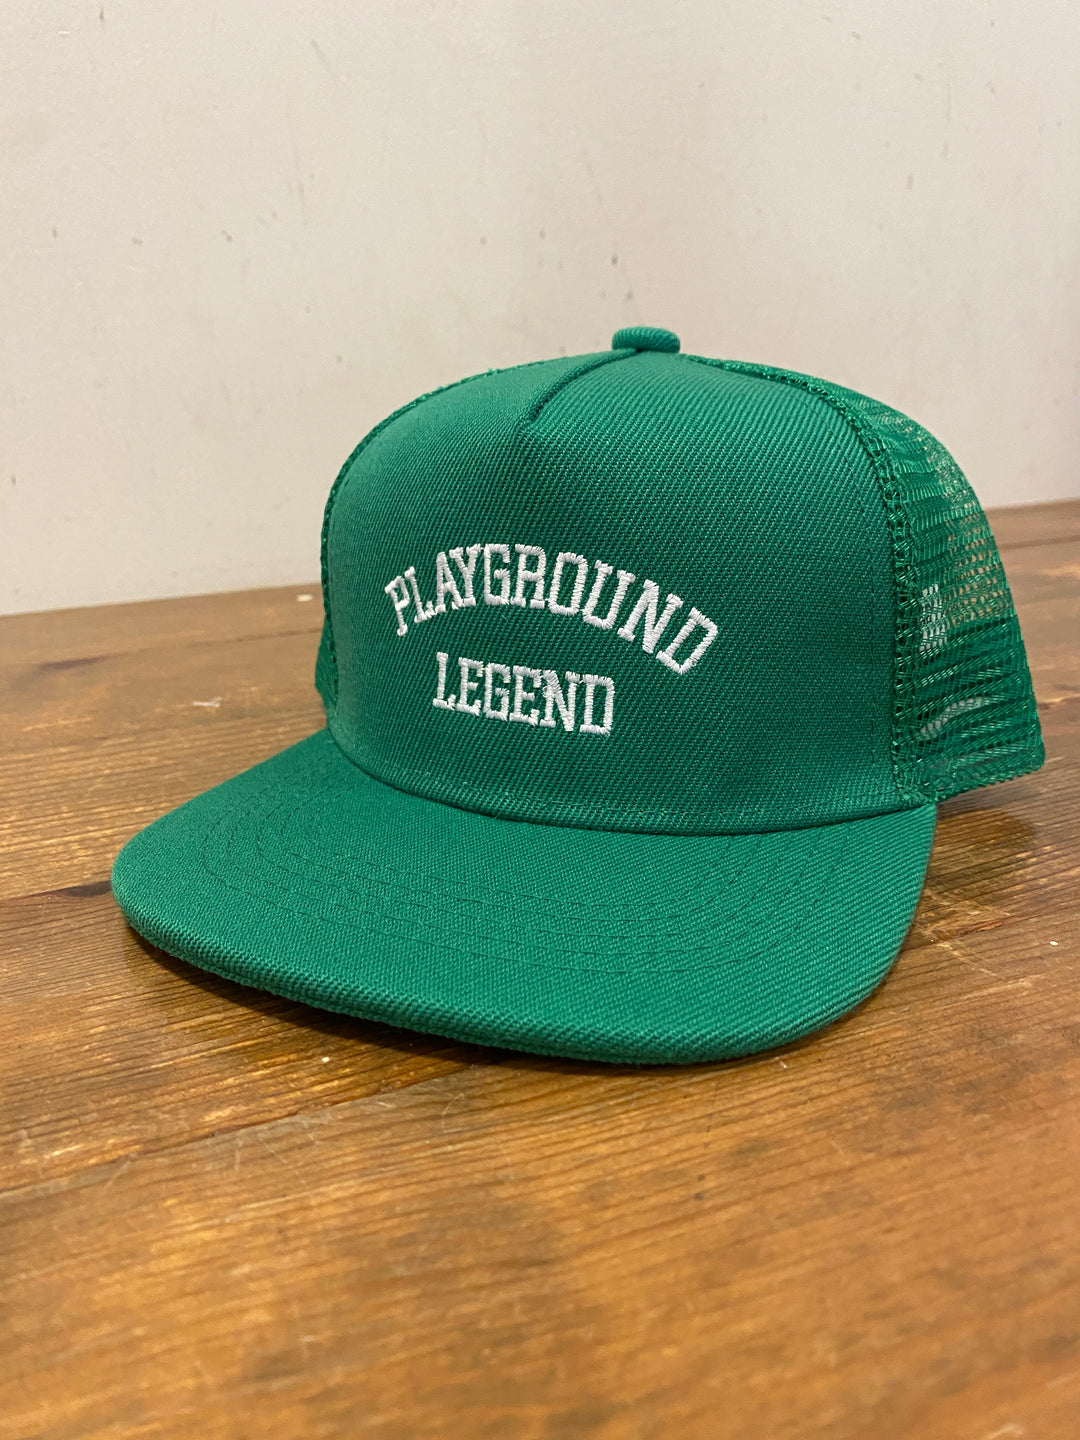 Playground Legend Hat | Green - Main Image Number 1 of 1